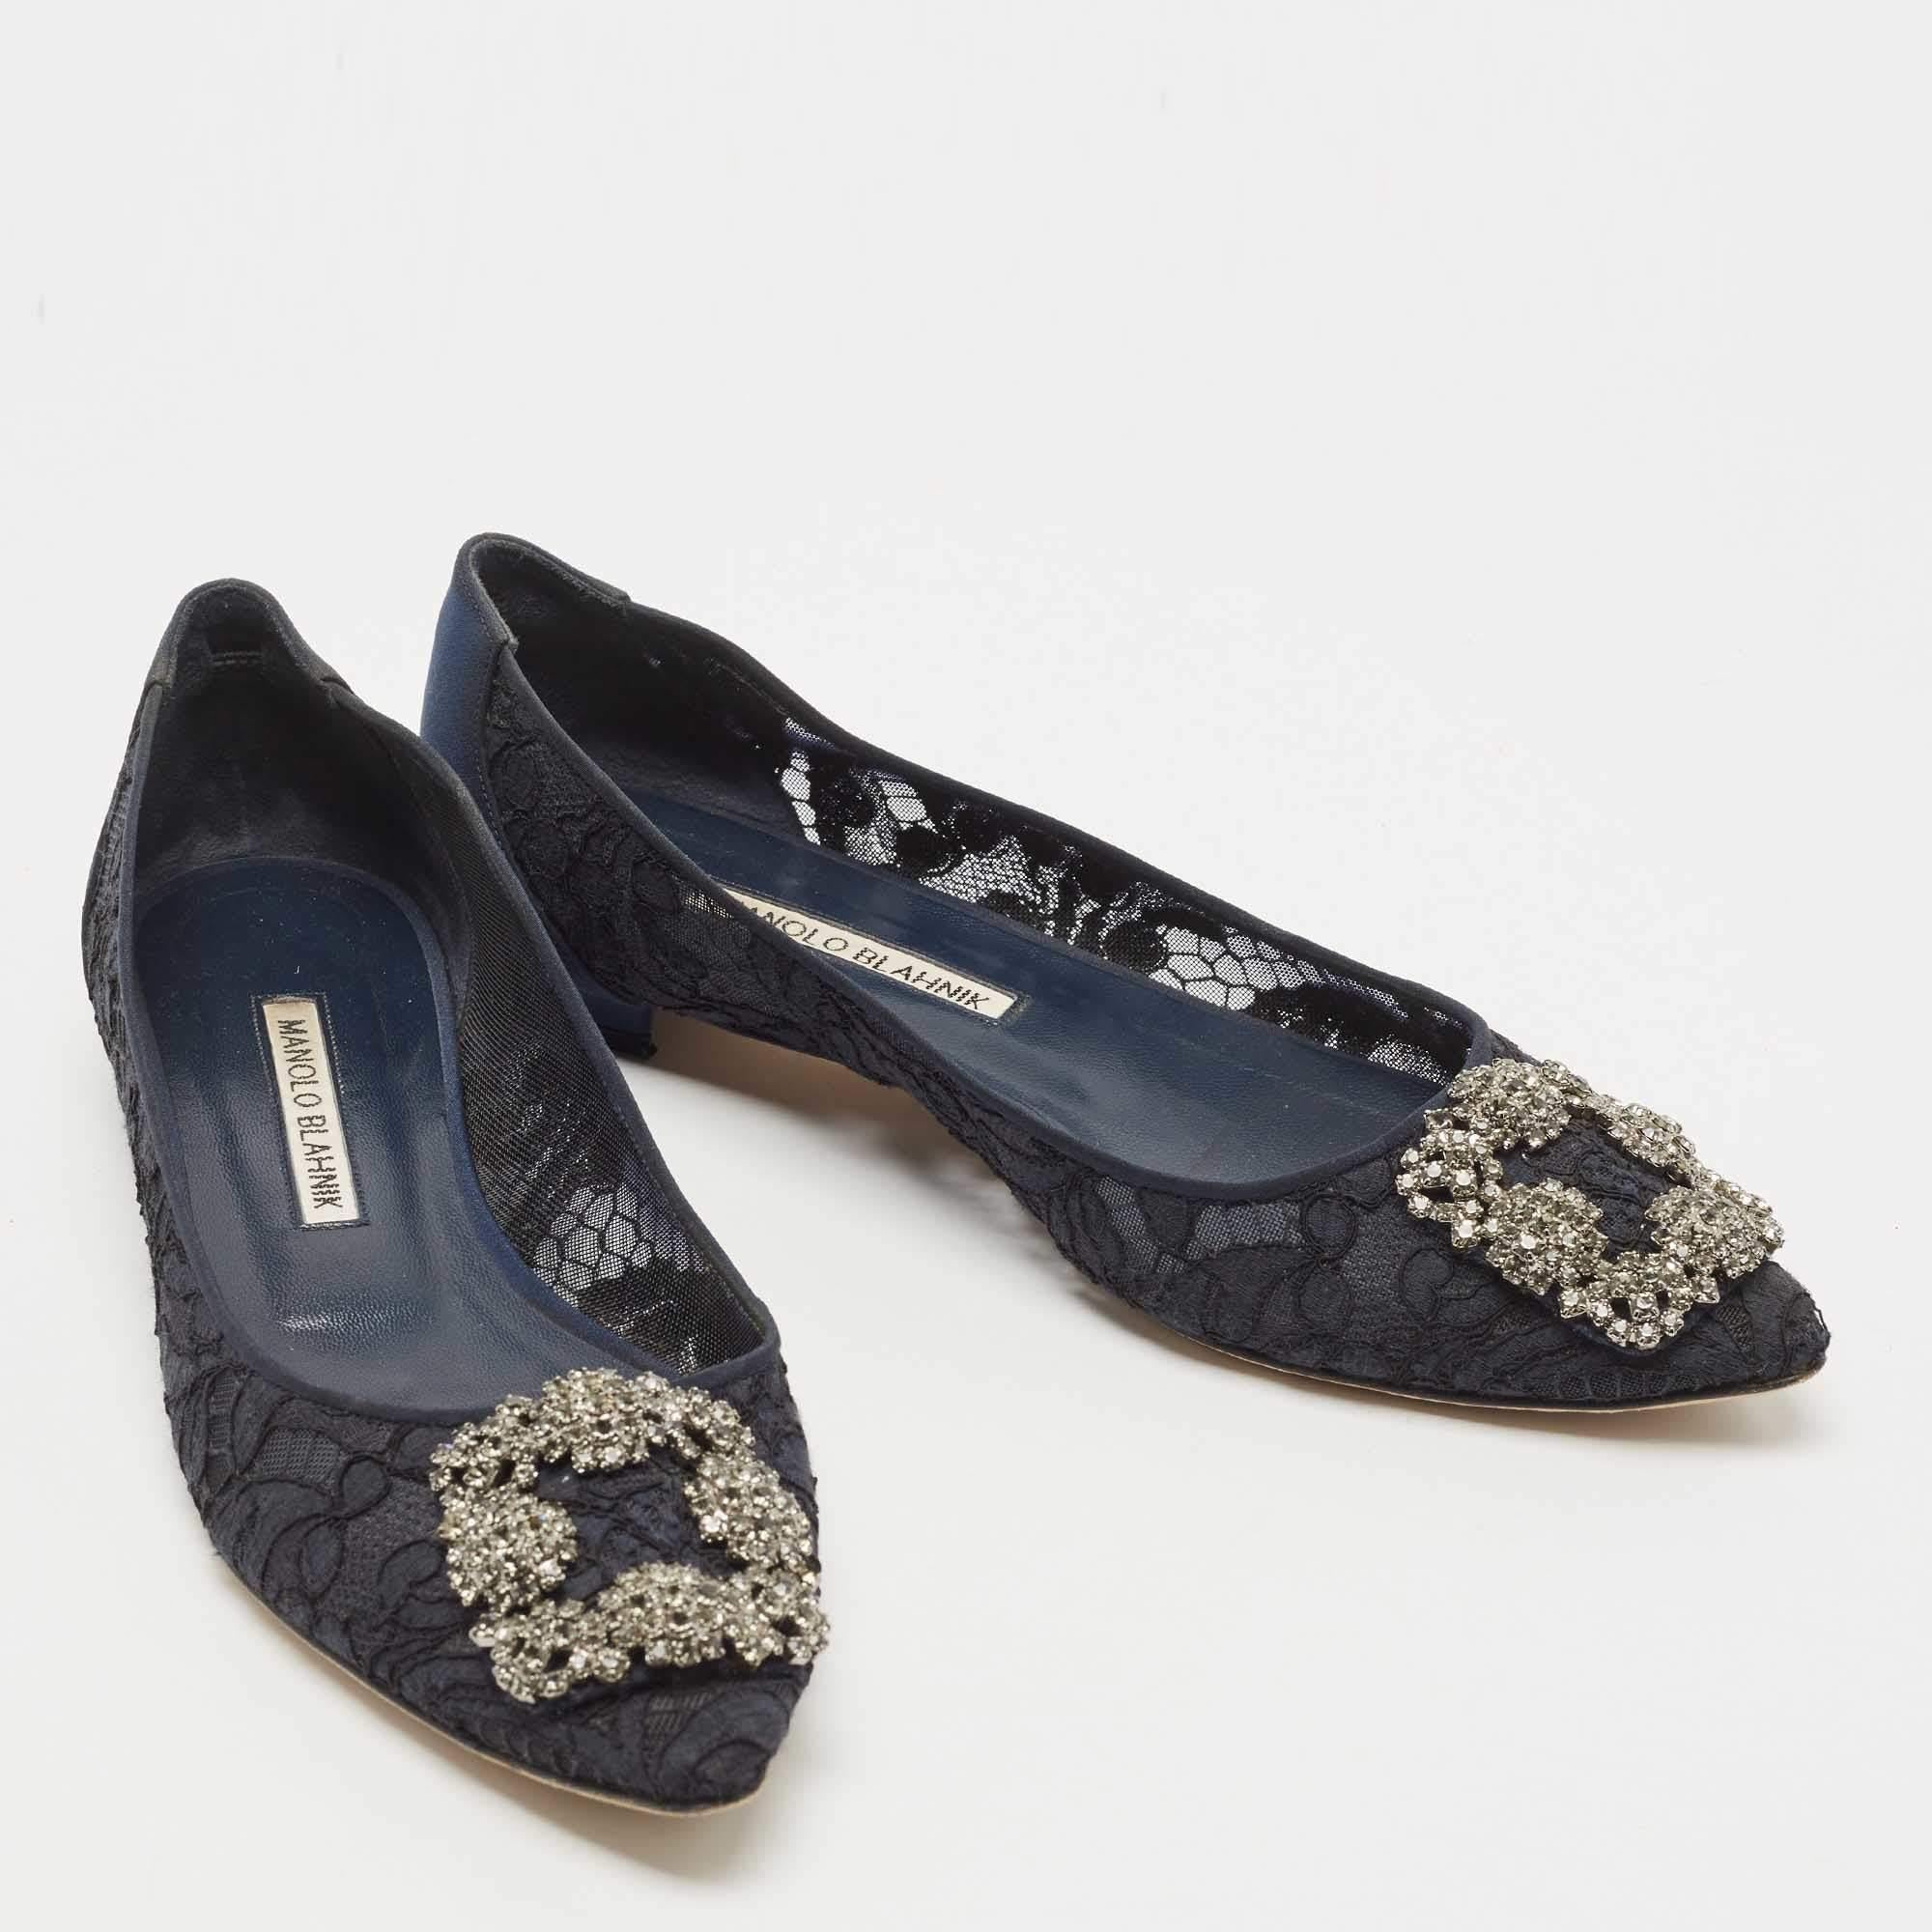 Manolo Blahnik Navy Blue Lace and Satin Hangisi Ballet Flats Size 37.5 1